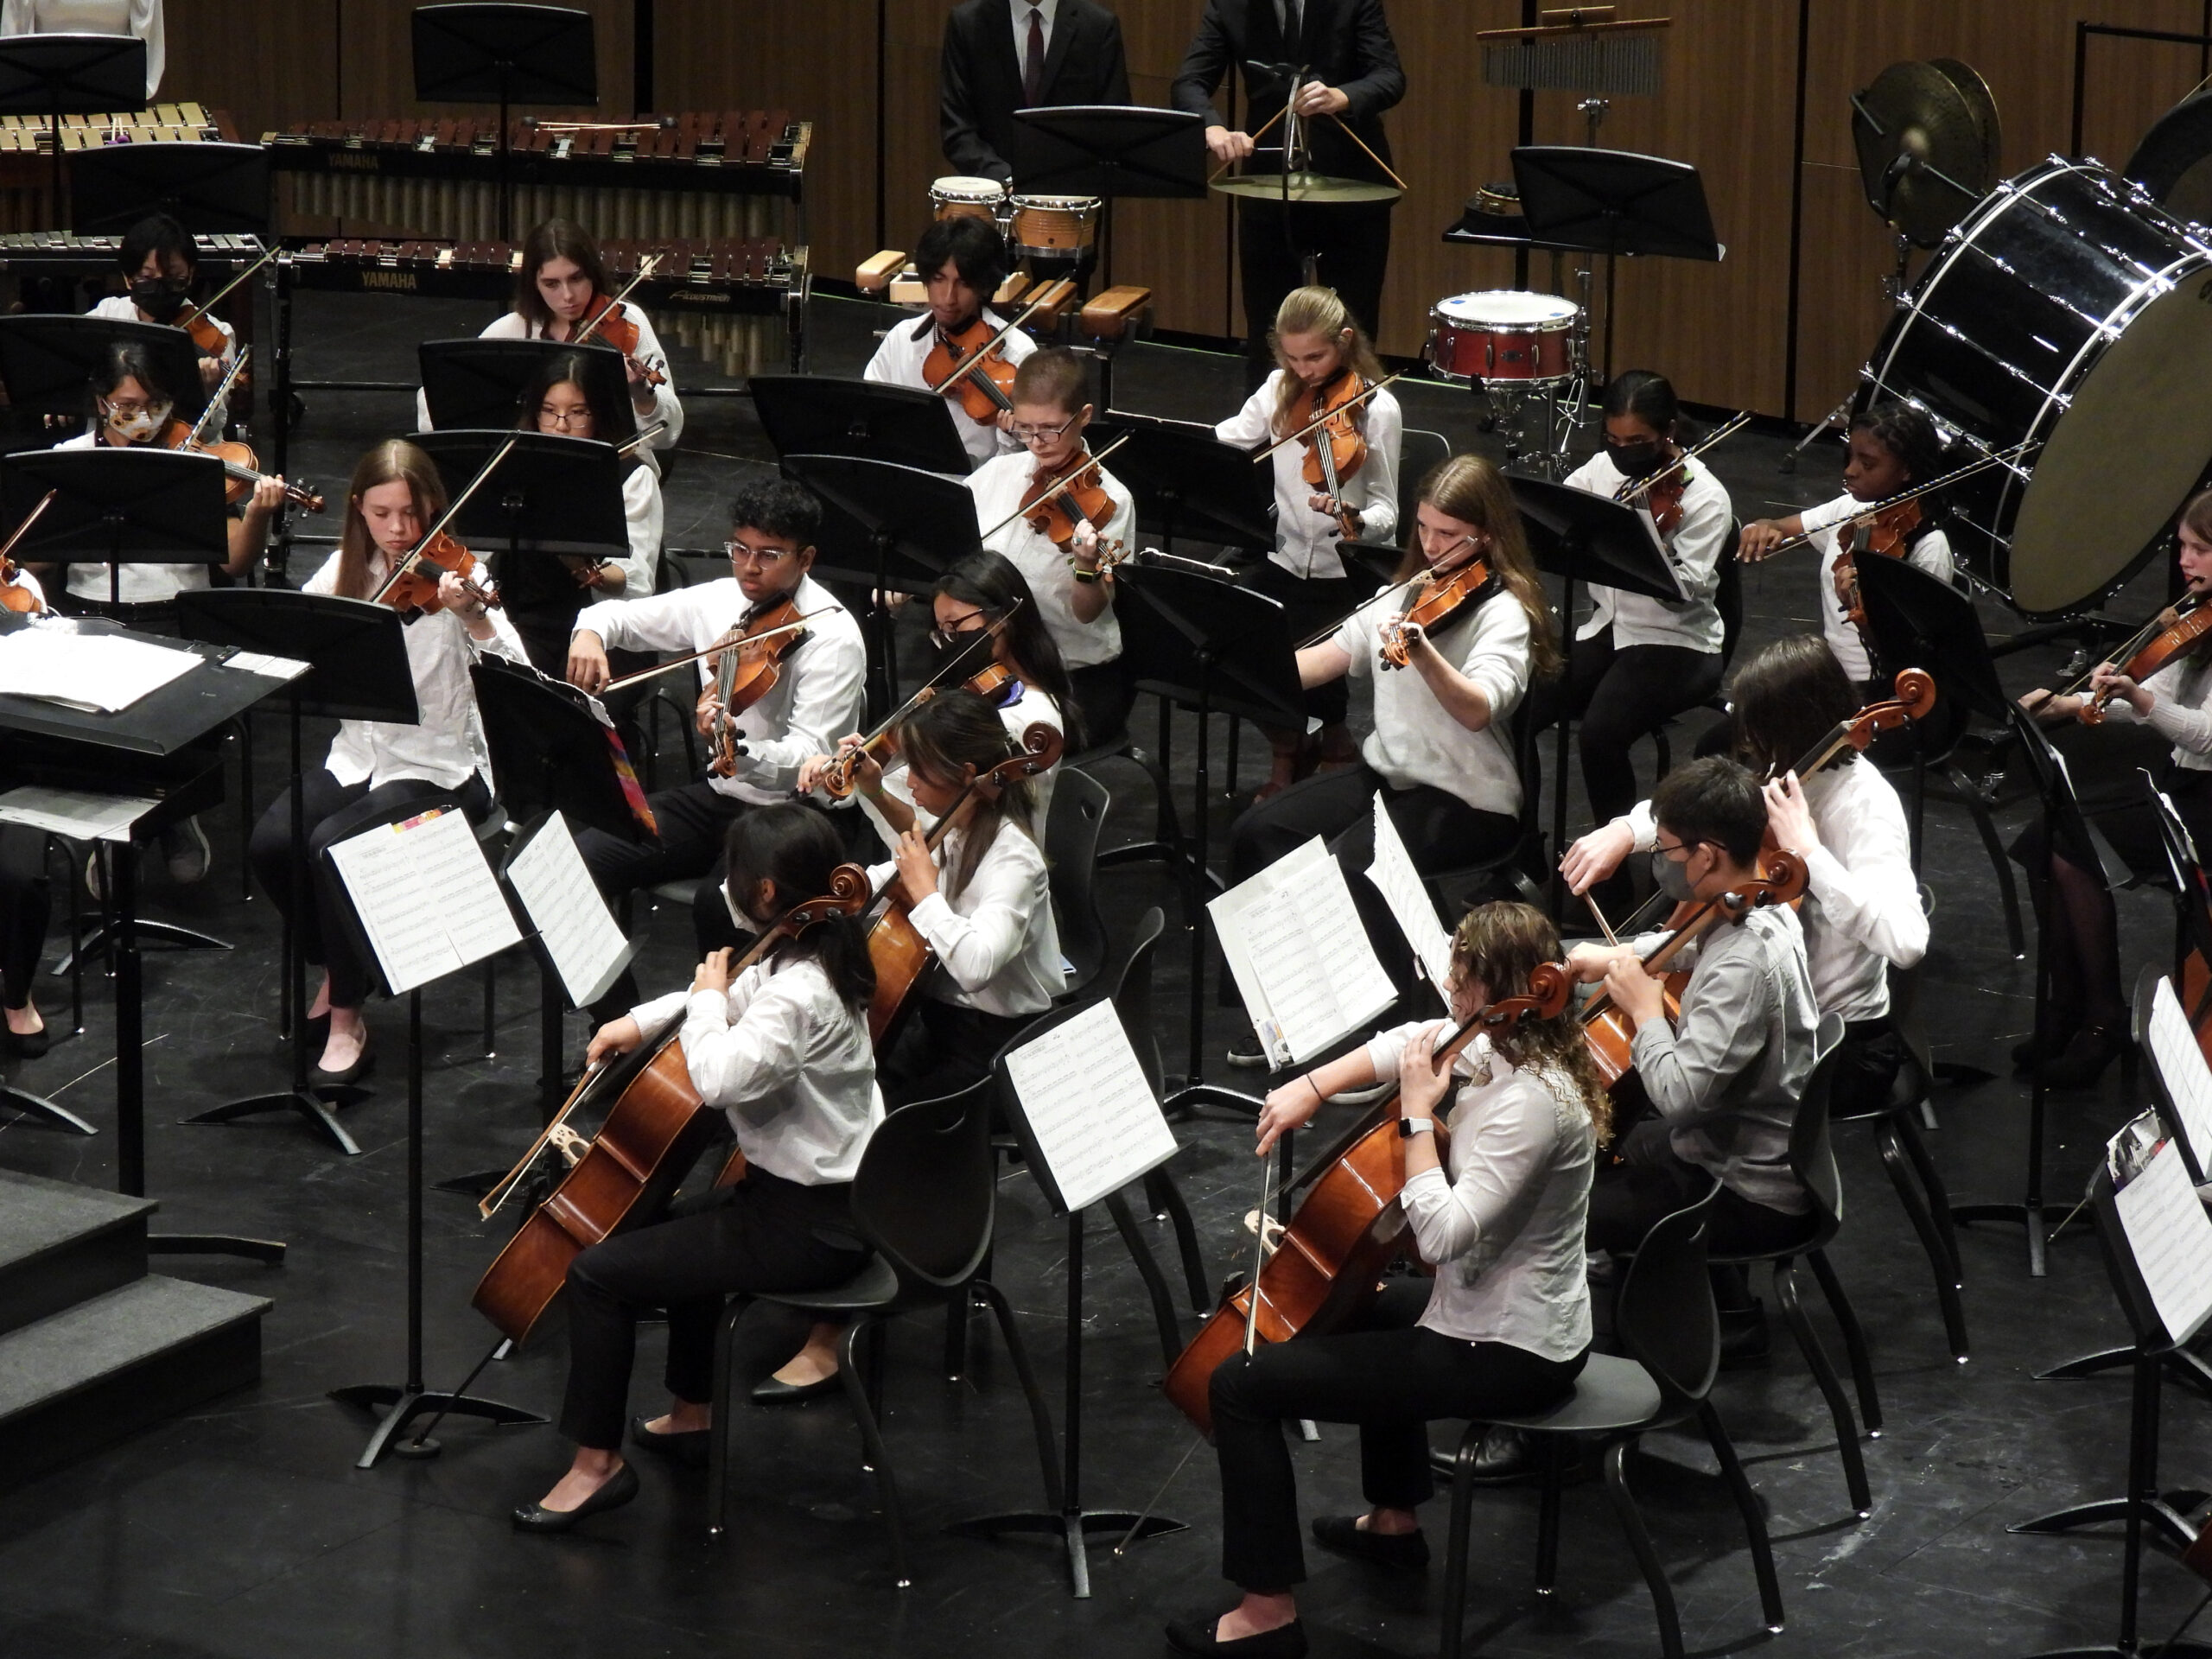 Central high school orchestra musicians performing in Decker Theater